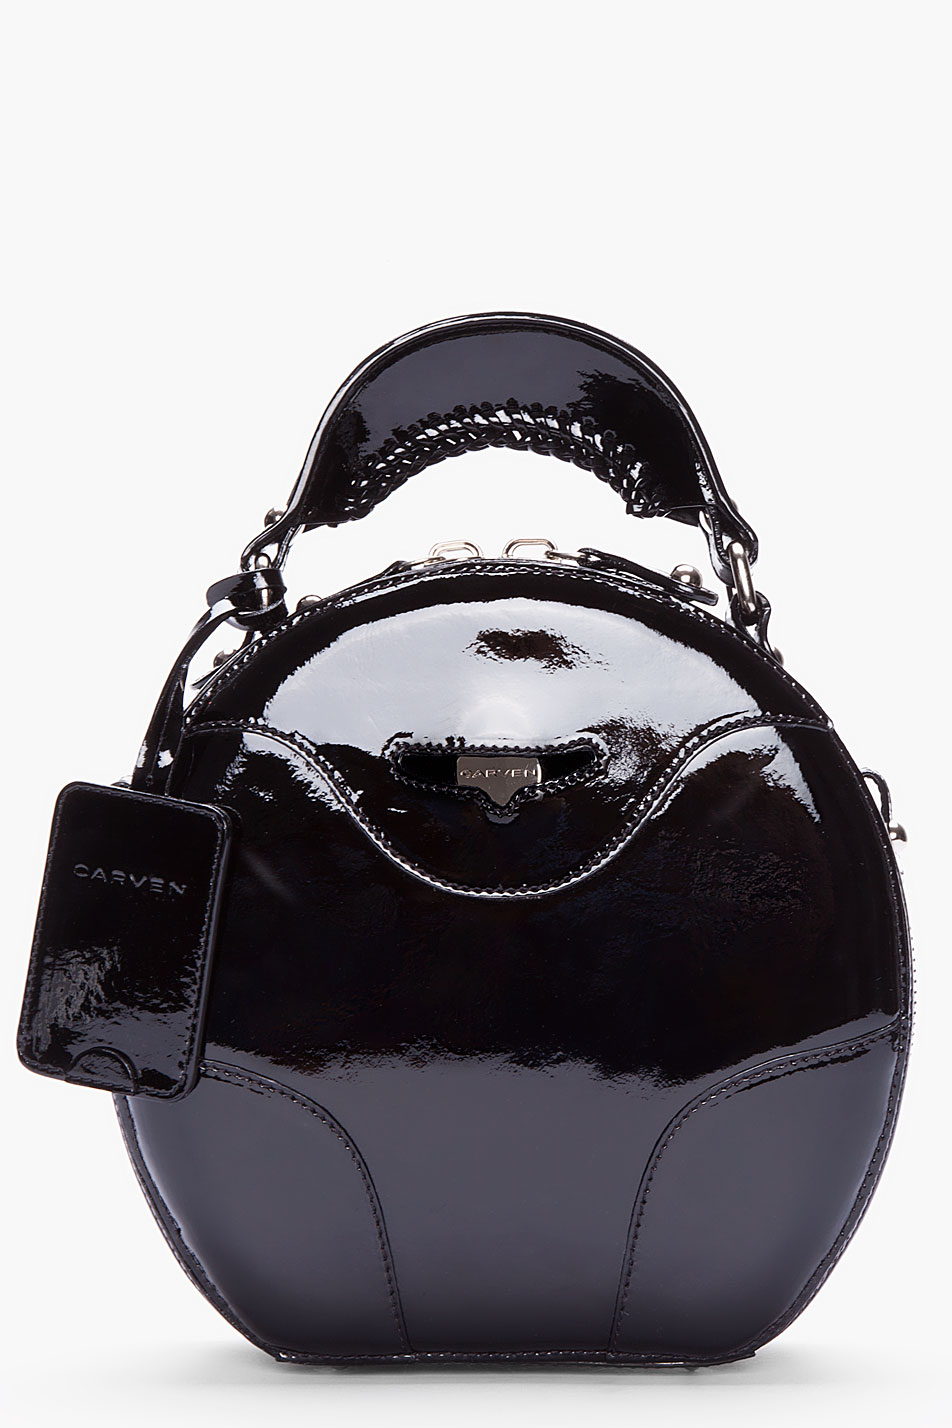 Carven Black Patent Leather Round Bag - Lyst